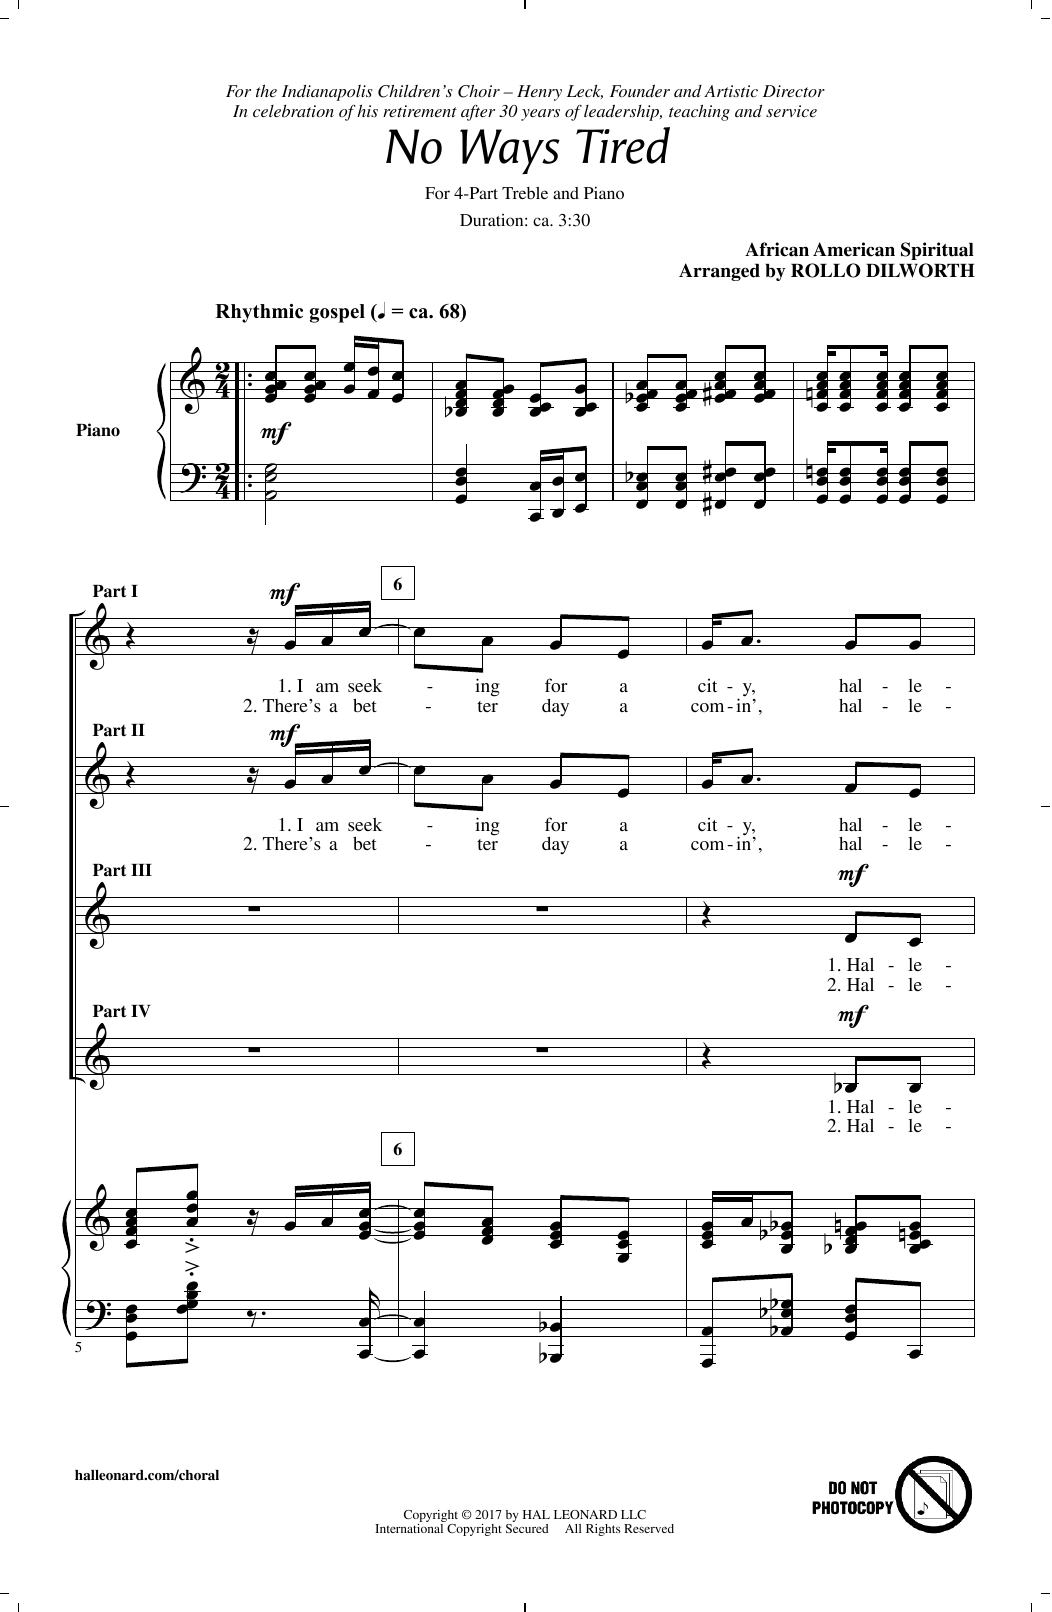 African American Spiritual No Ways Tired (arr. Rollo Dilworth) sheet music notes and chords. Download Printable PDF.